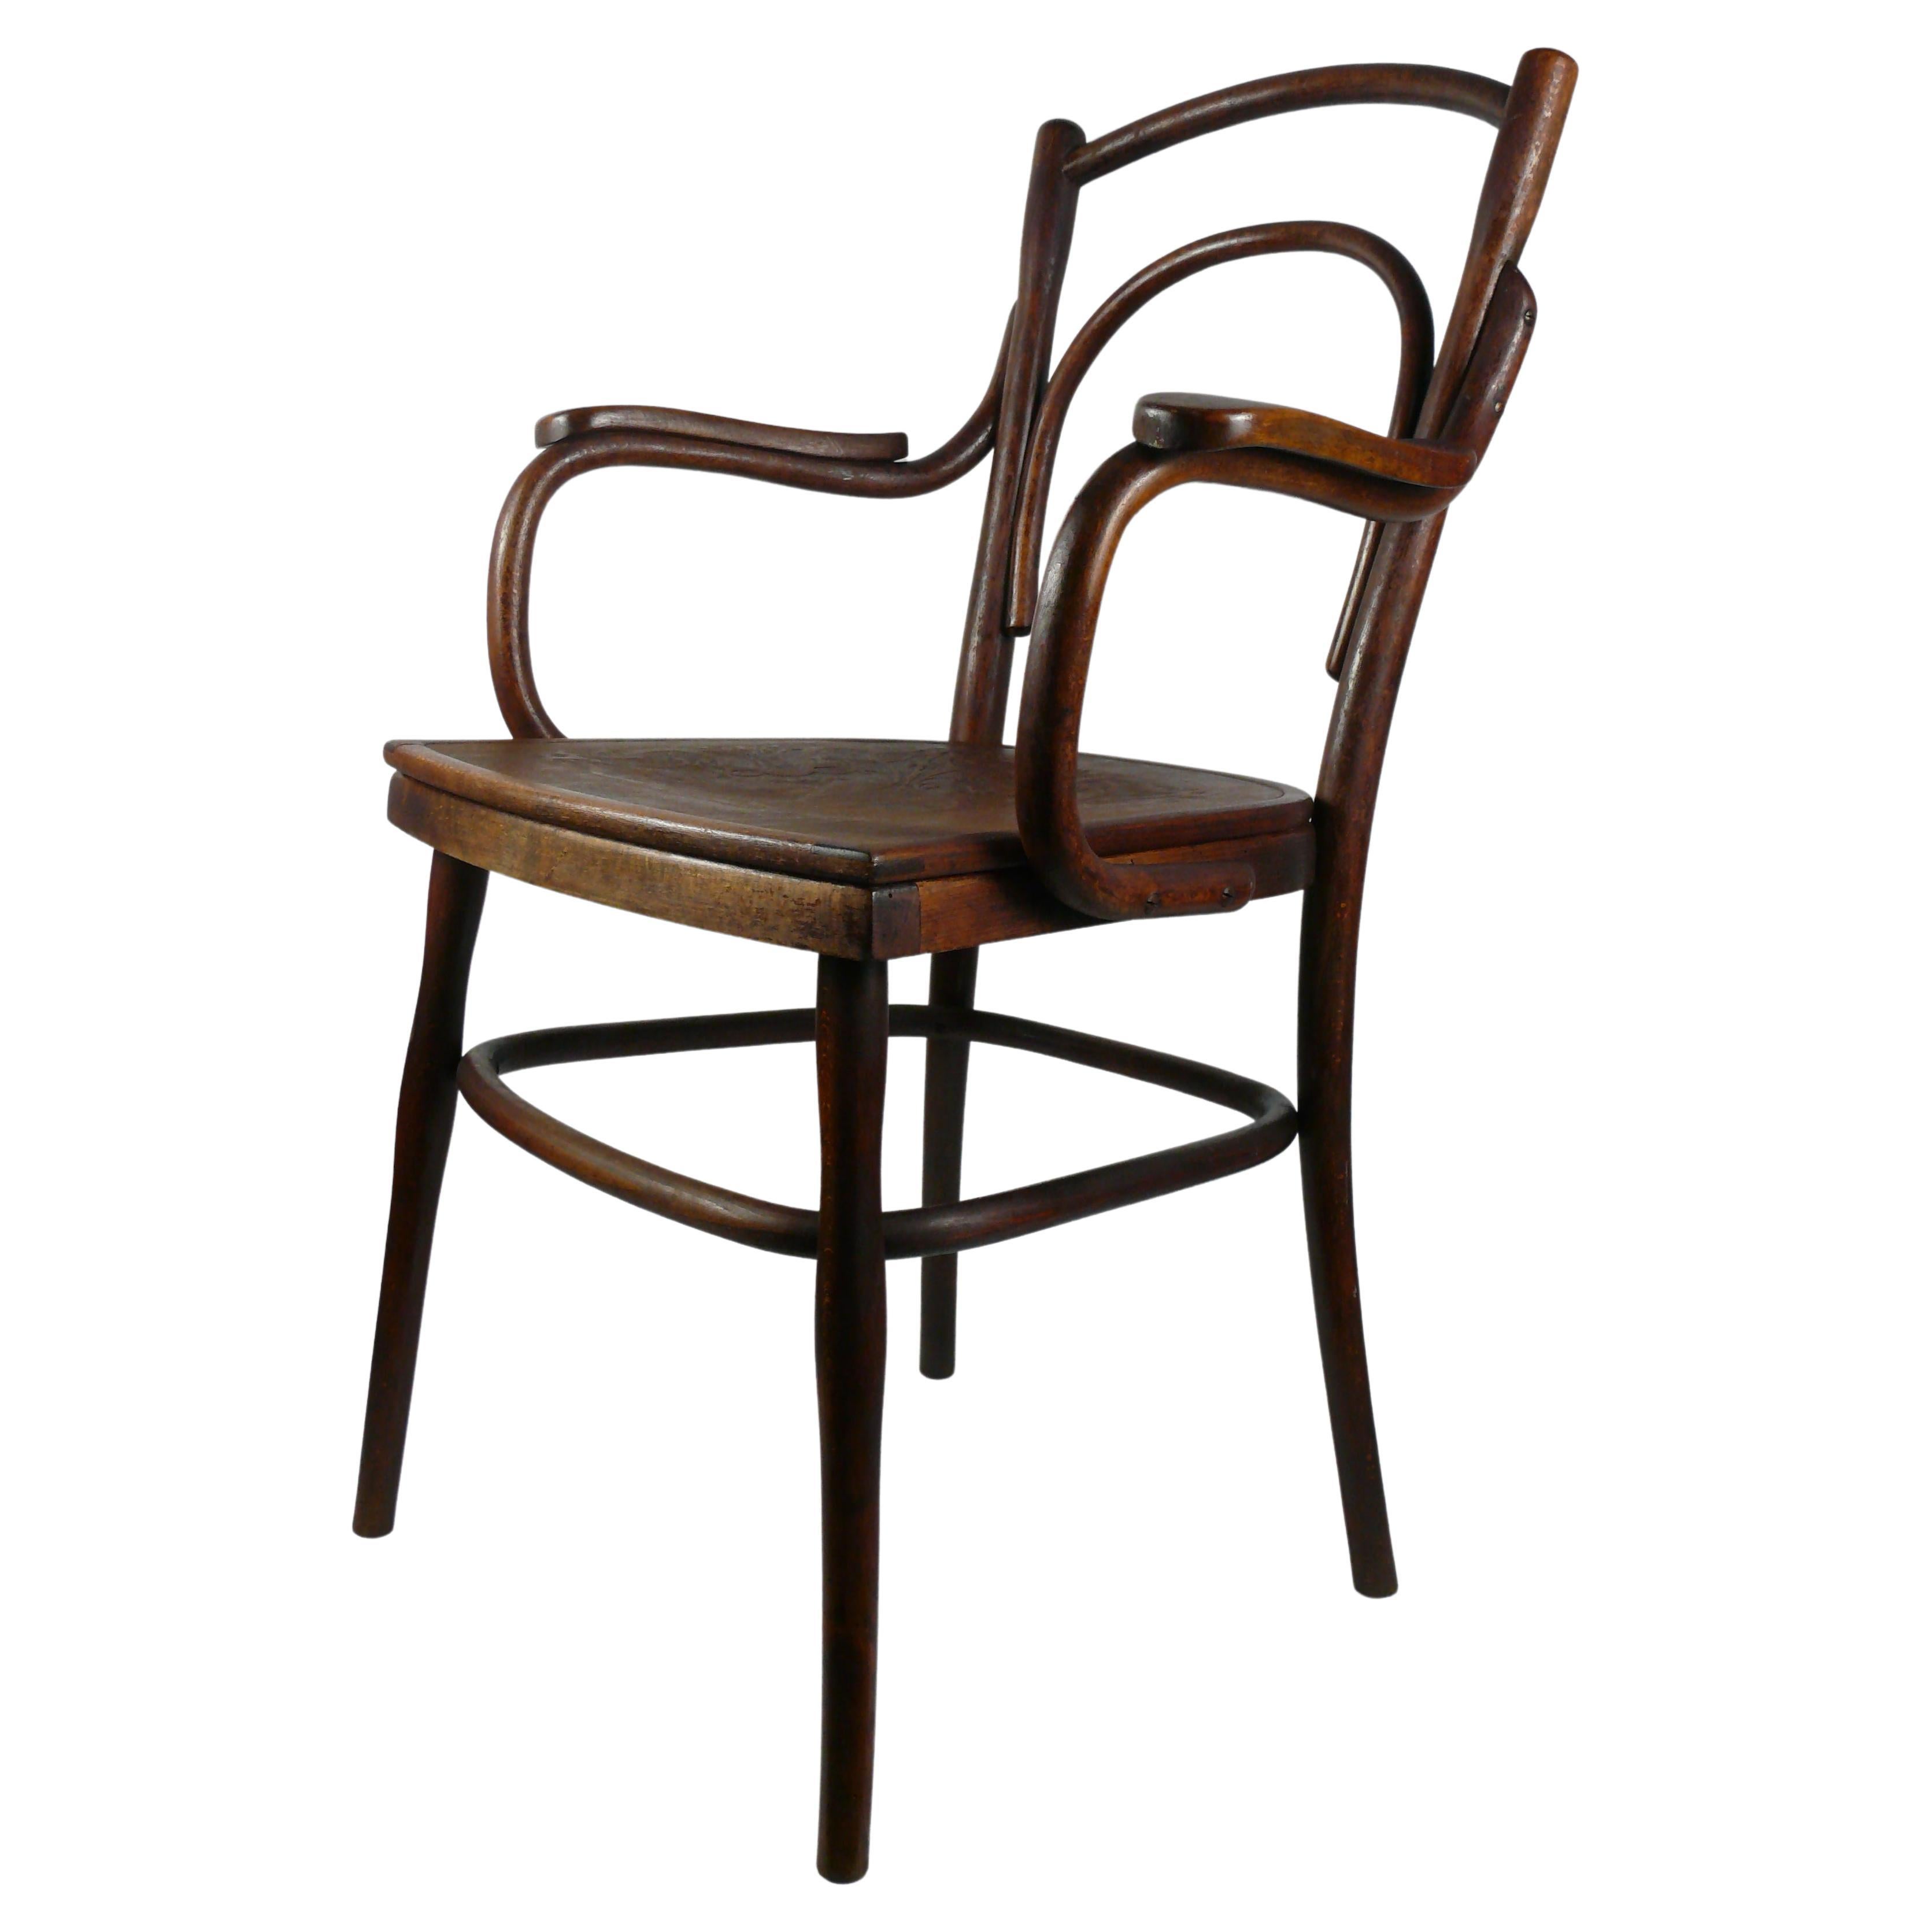 Thonet Bentwood Fauteuil, Early 20th Century